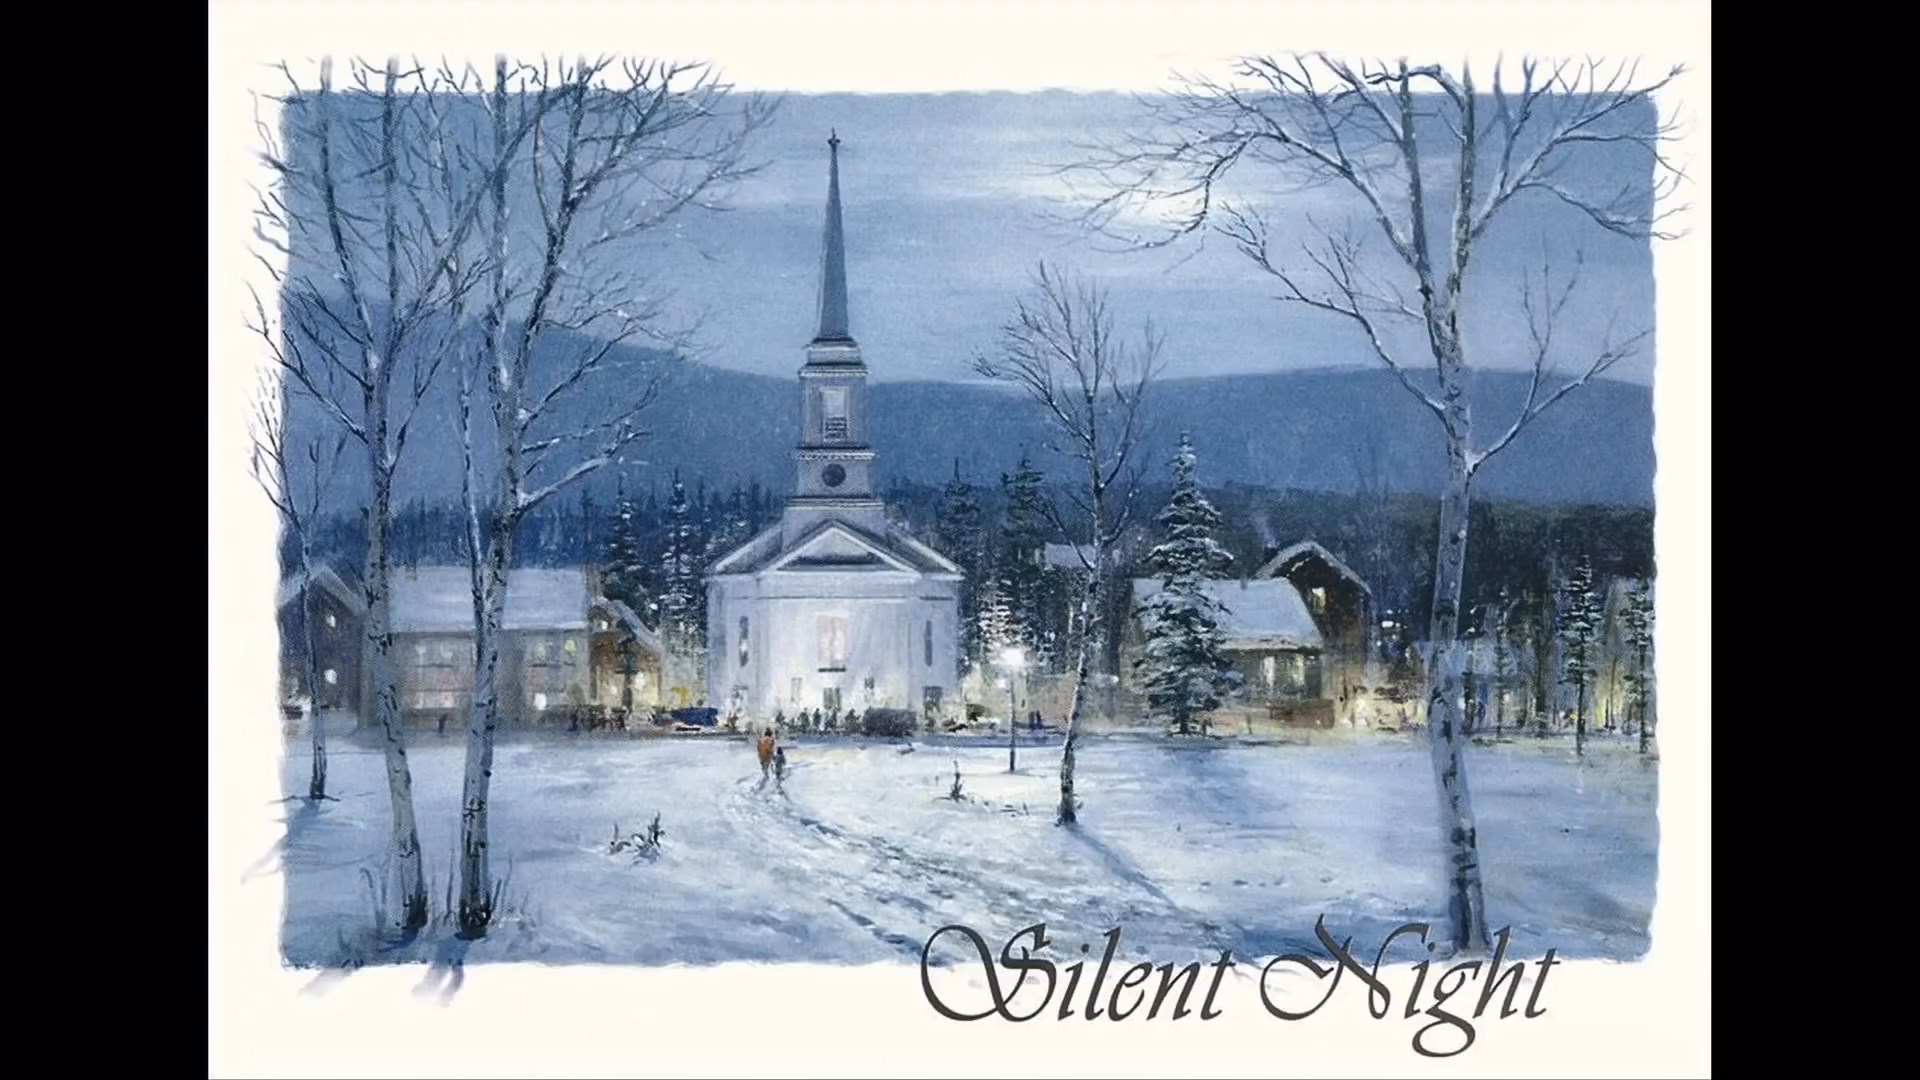 OLD FASHIONED CHRISTMAS AND WINTER SCENES c.jpg